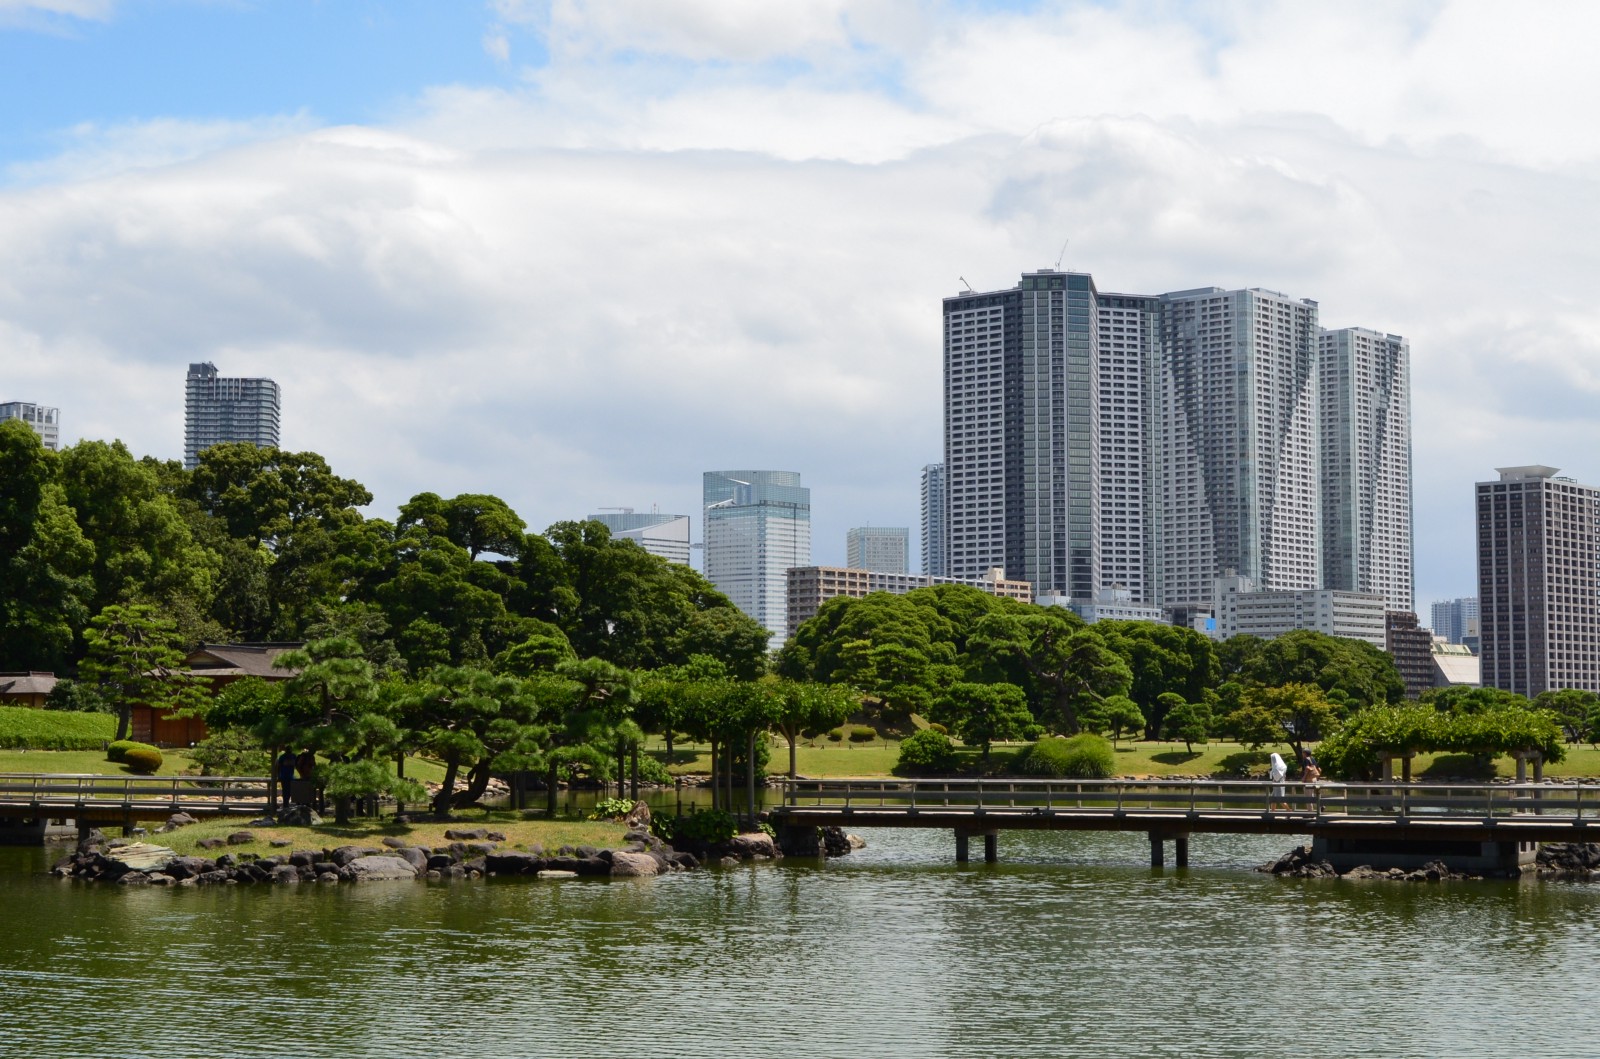 The traditional Japanese garden with Tokyo's skyline